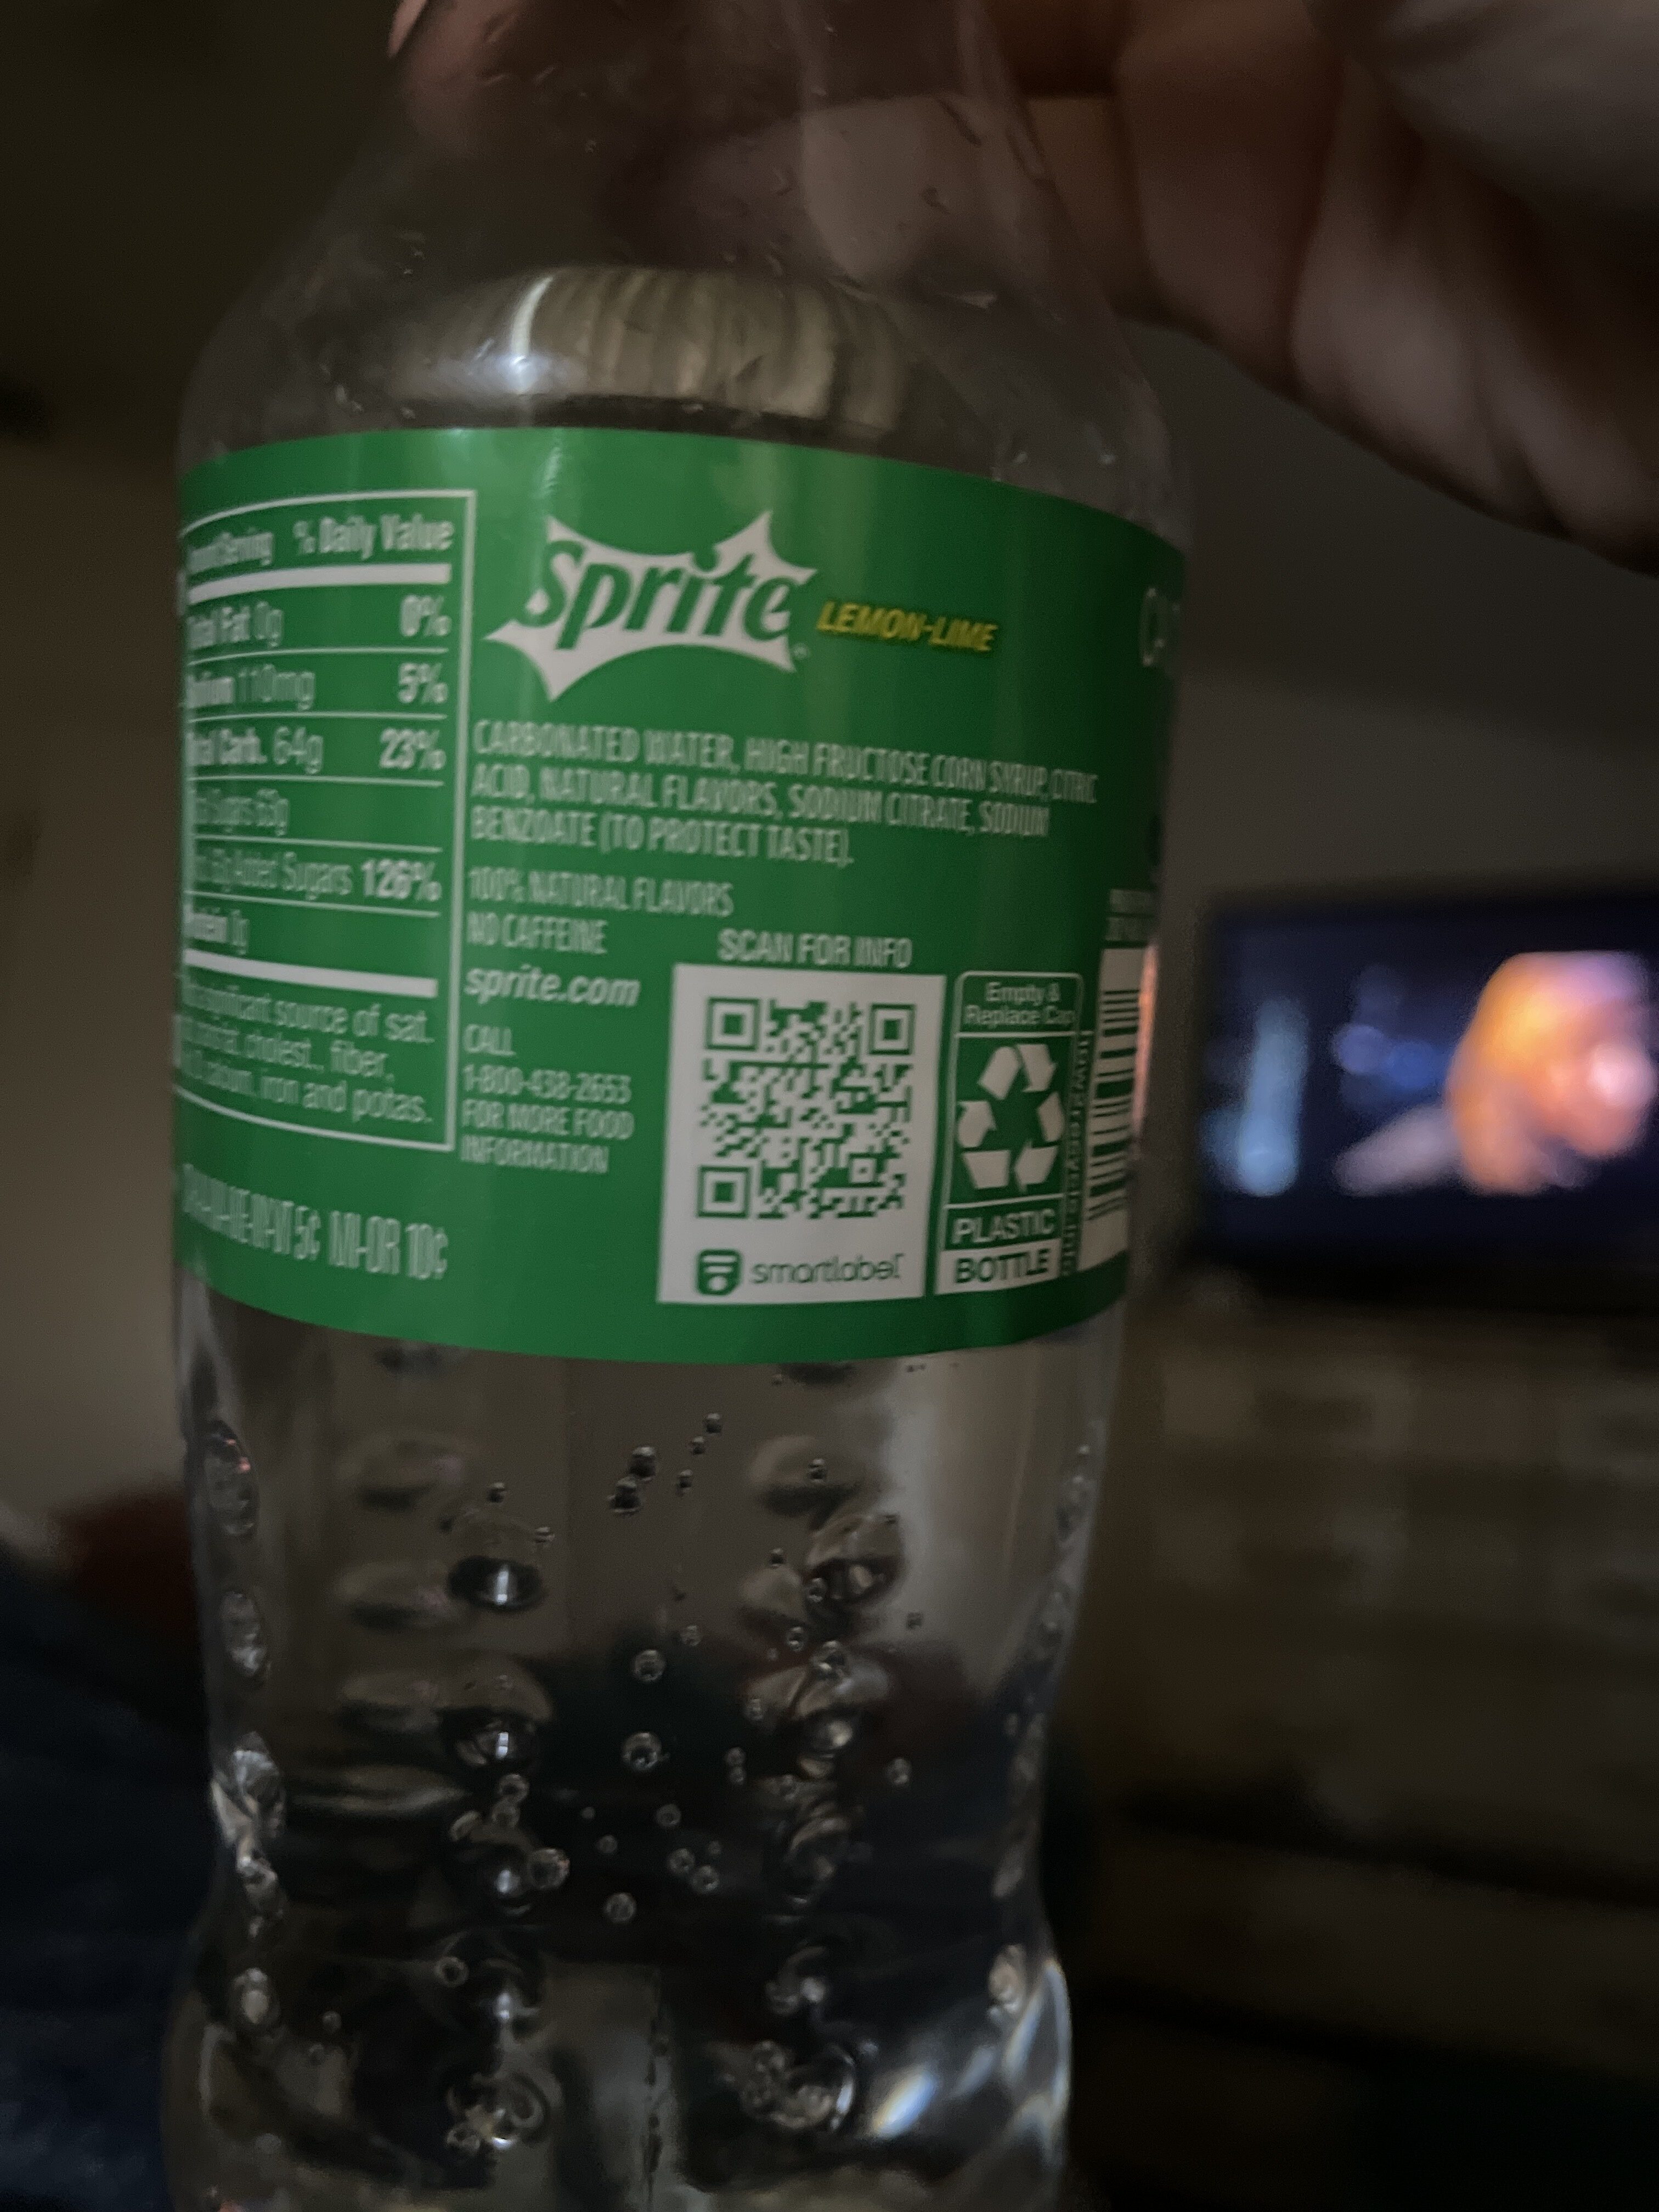 Lemon Lime Soda - Recycling instructions and/or packaging information